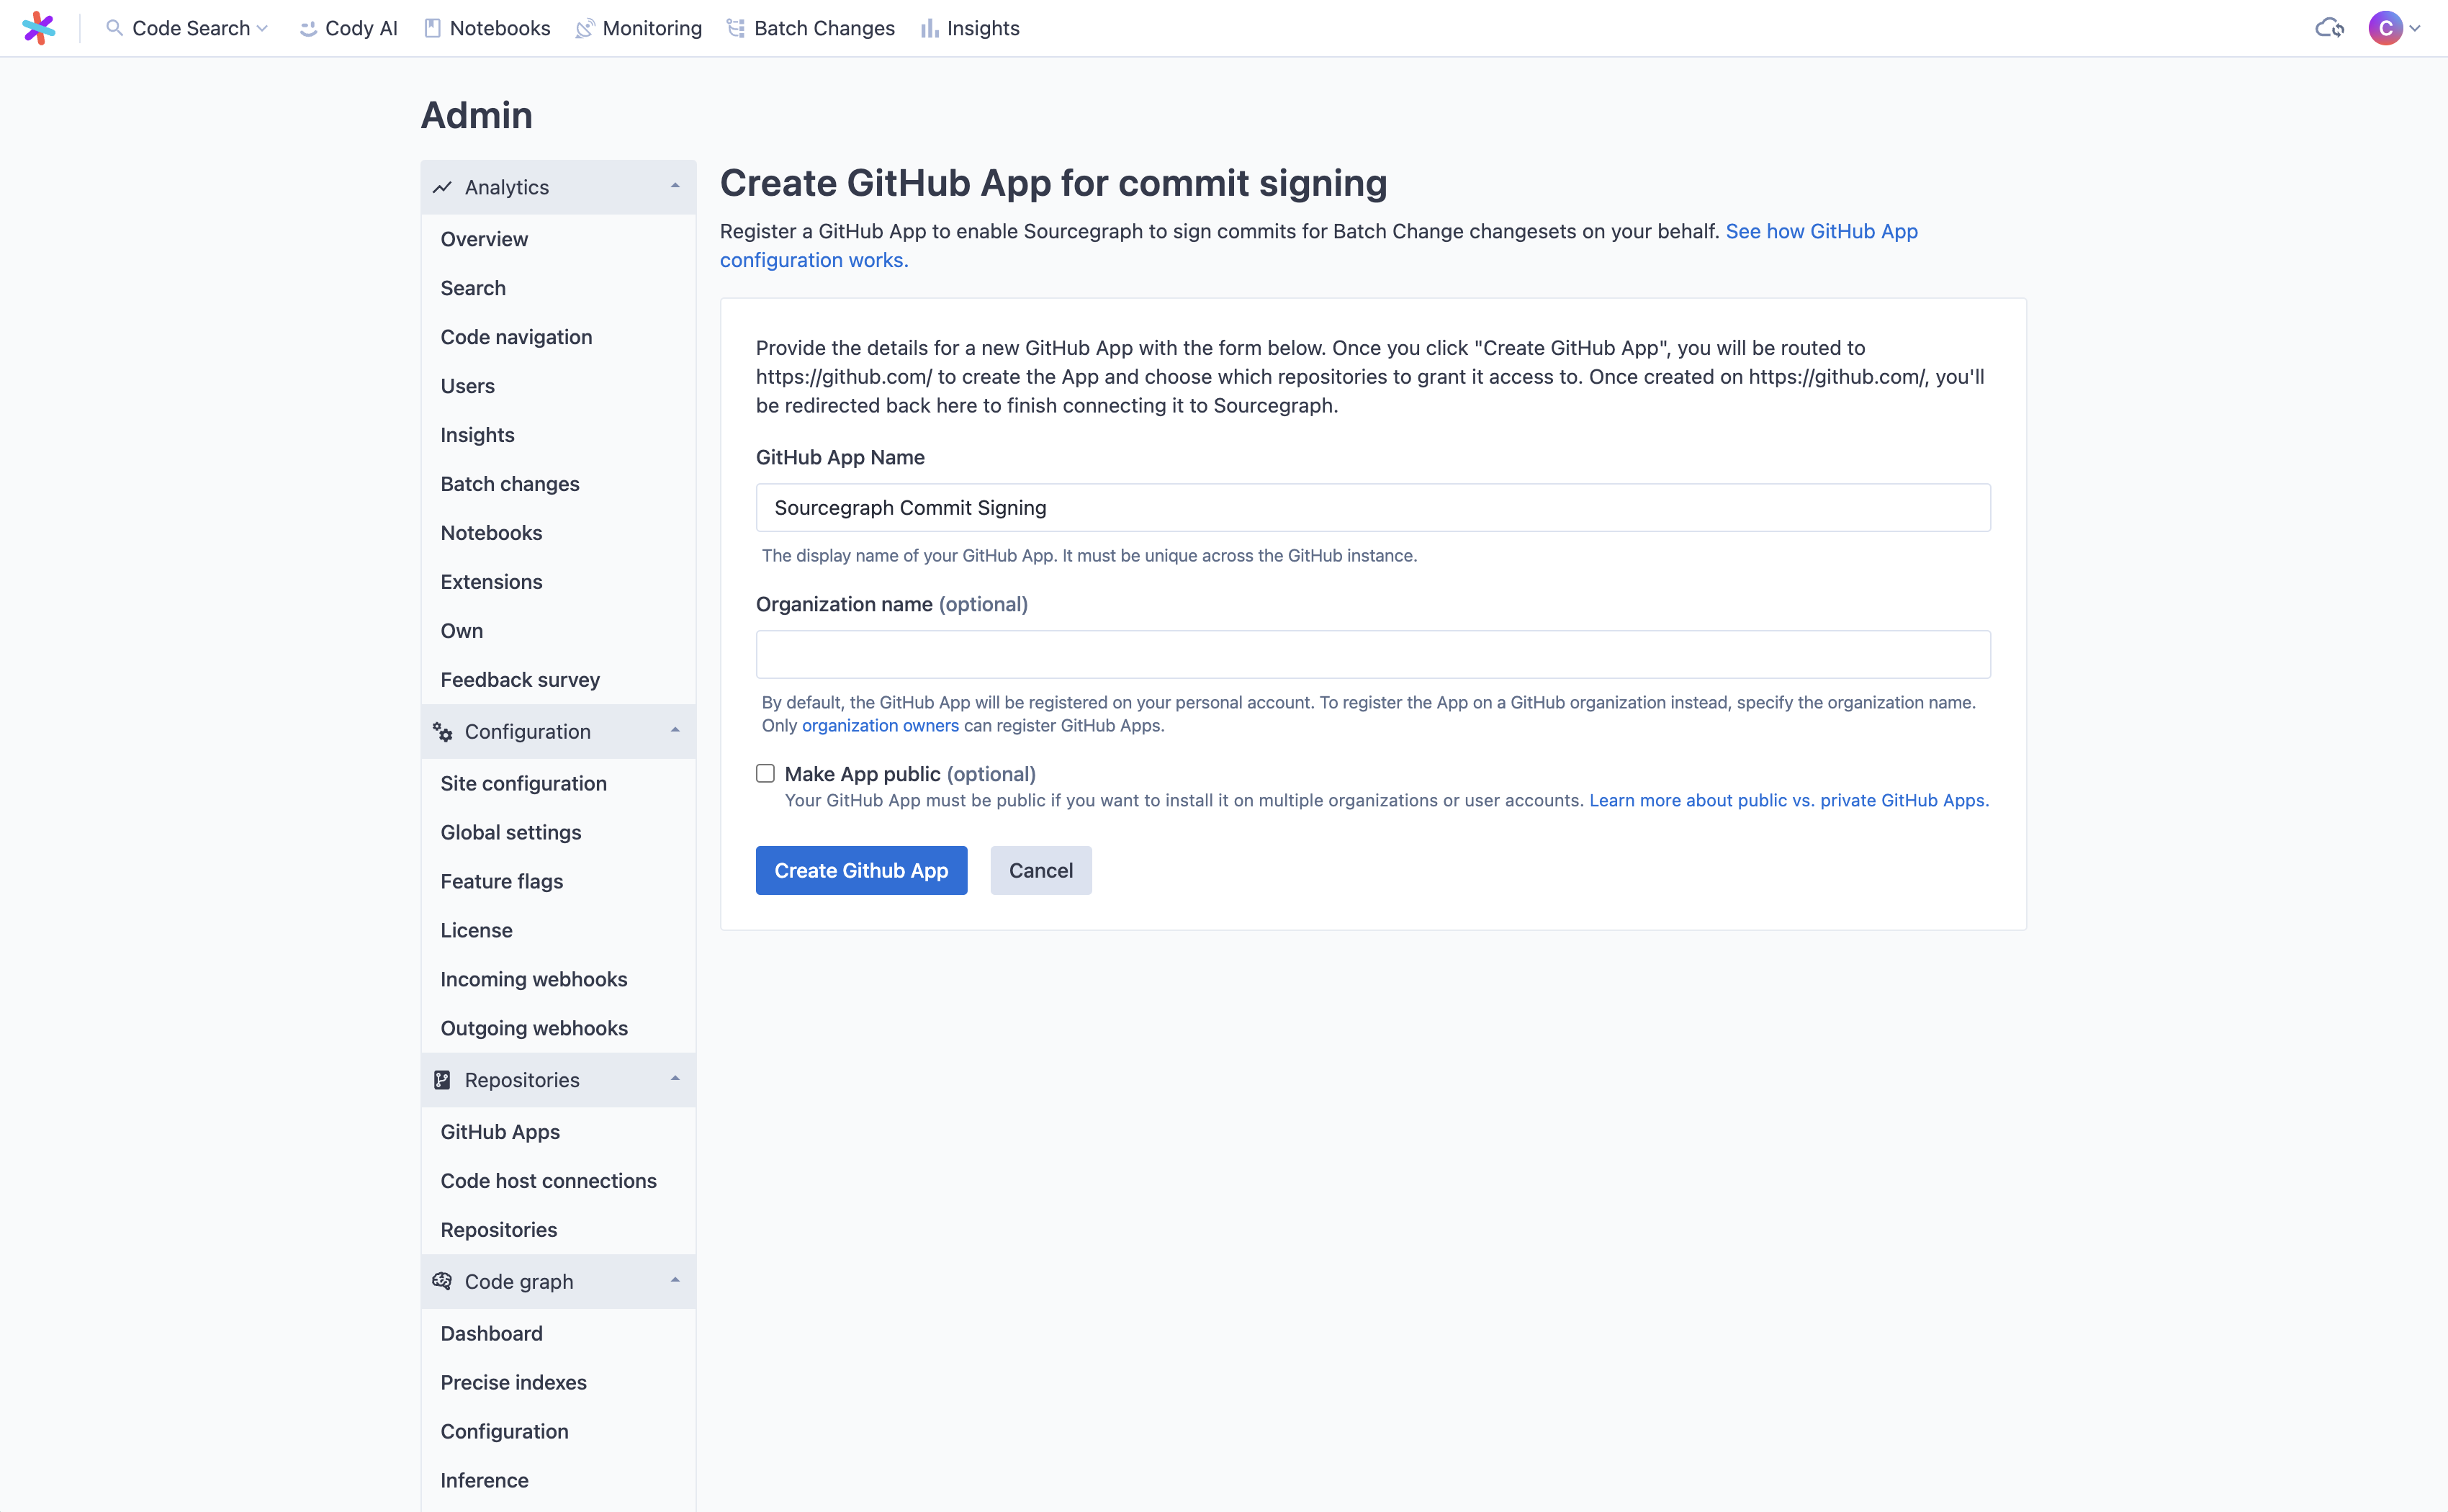 The GitHub App creation page on Sourcegraph, with the default values filled out